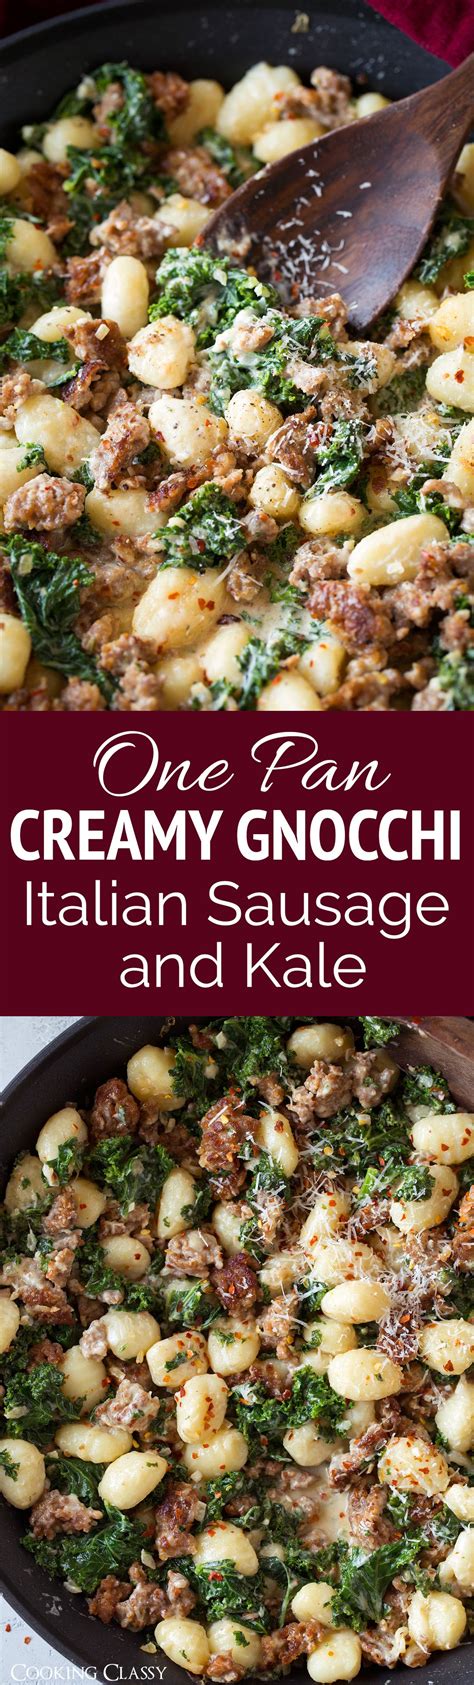 One Pan Creamy Gnocchi With Italian Sausage And Kale This Is AMAZING